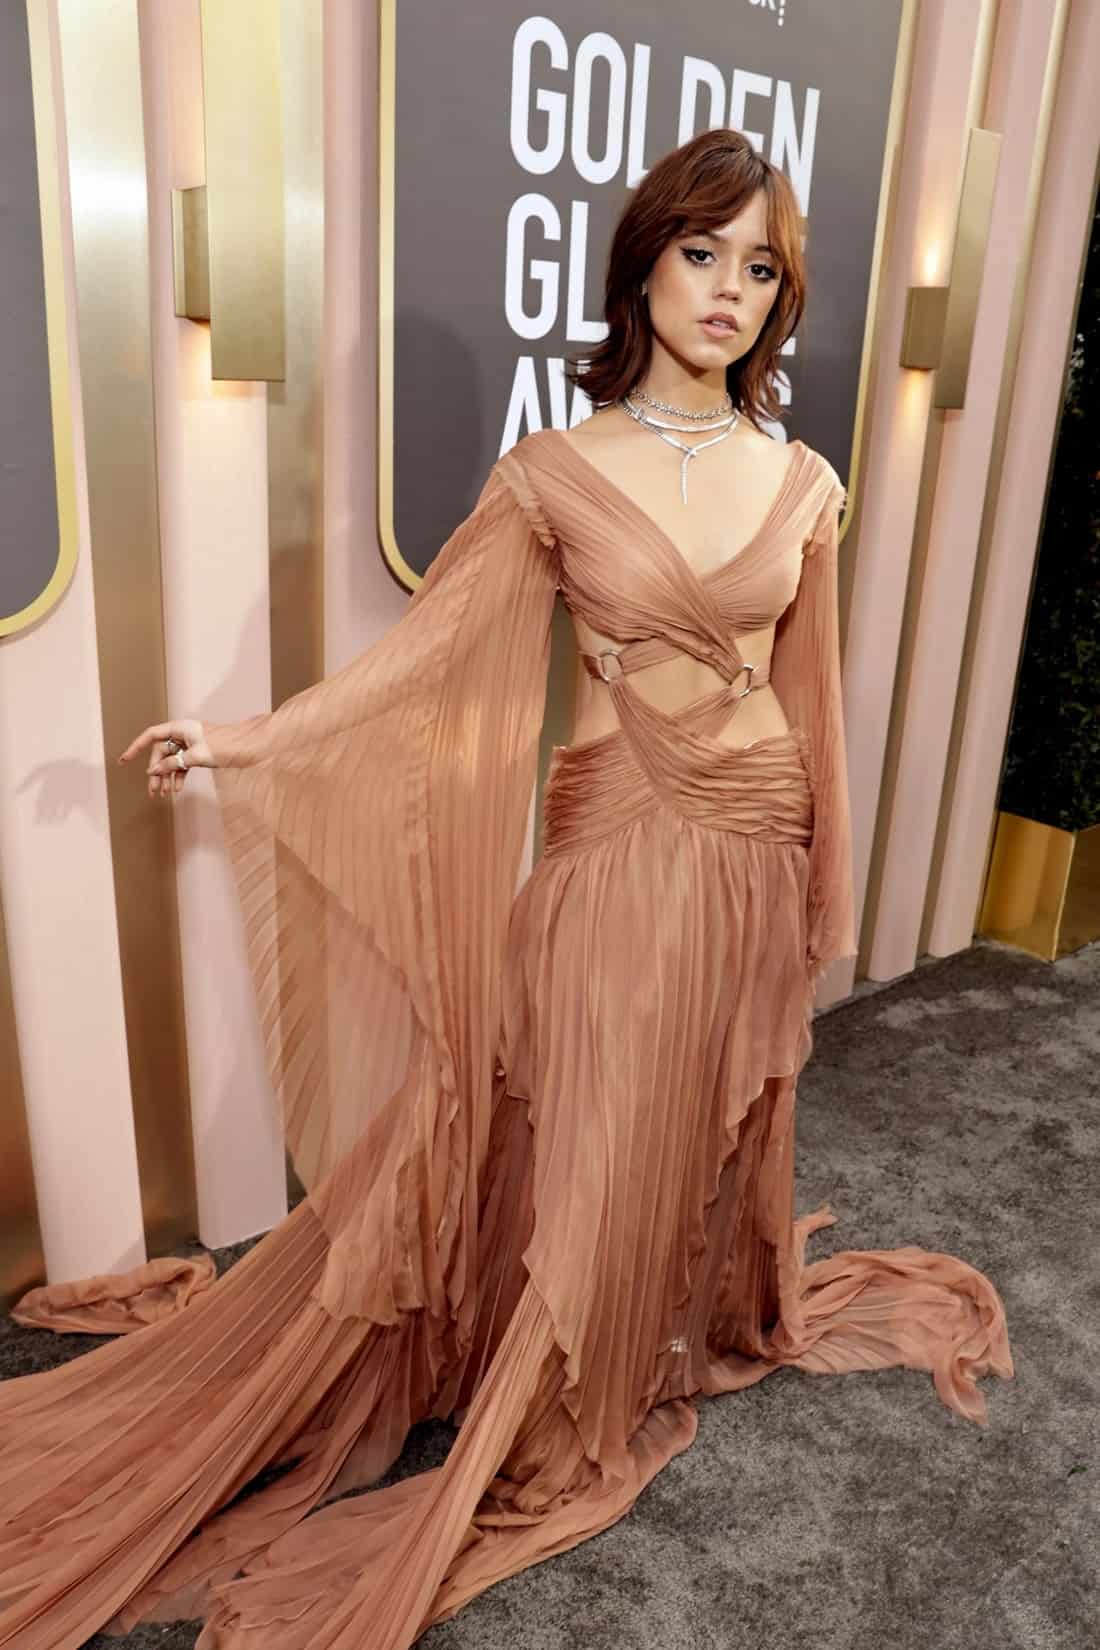 Jenna Ortega Wears Gucci on the Red Carpet at the 80th Golden Globe Awards